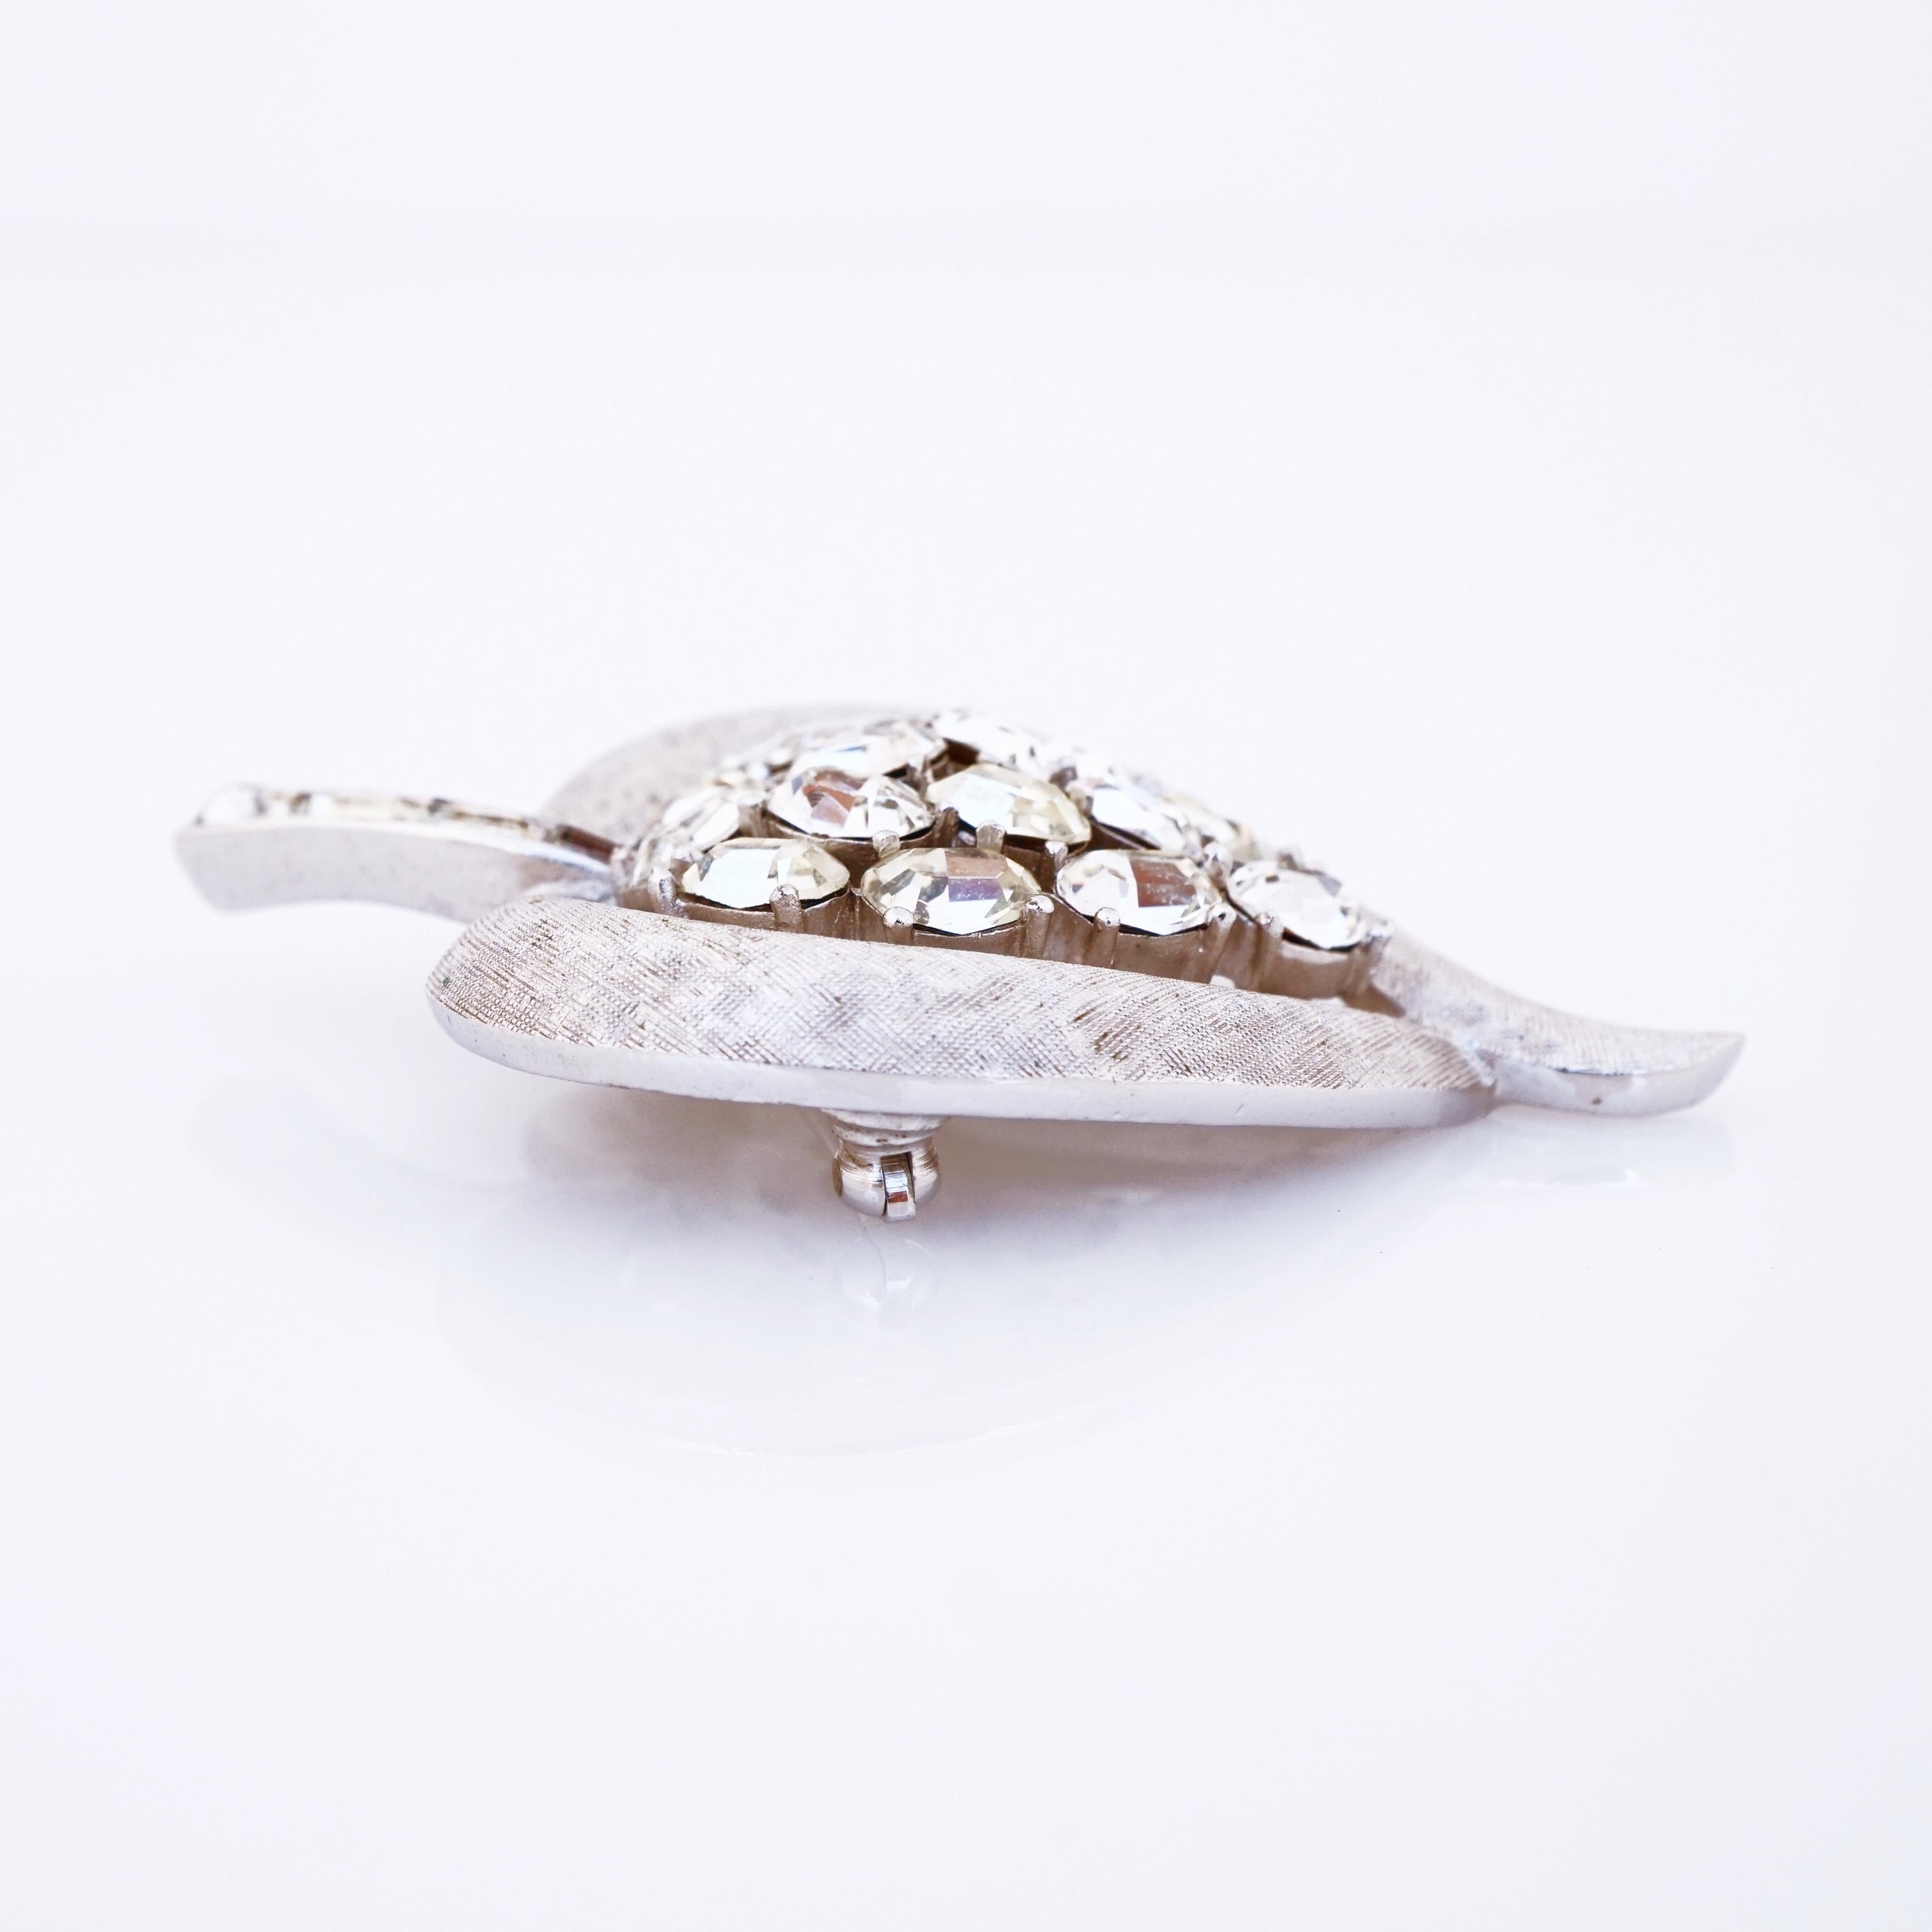 Modern Textured Silver Leaf Brooch With Crystals By Crown Trifari, 1950s For Sale